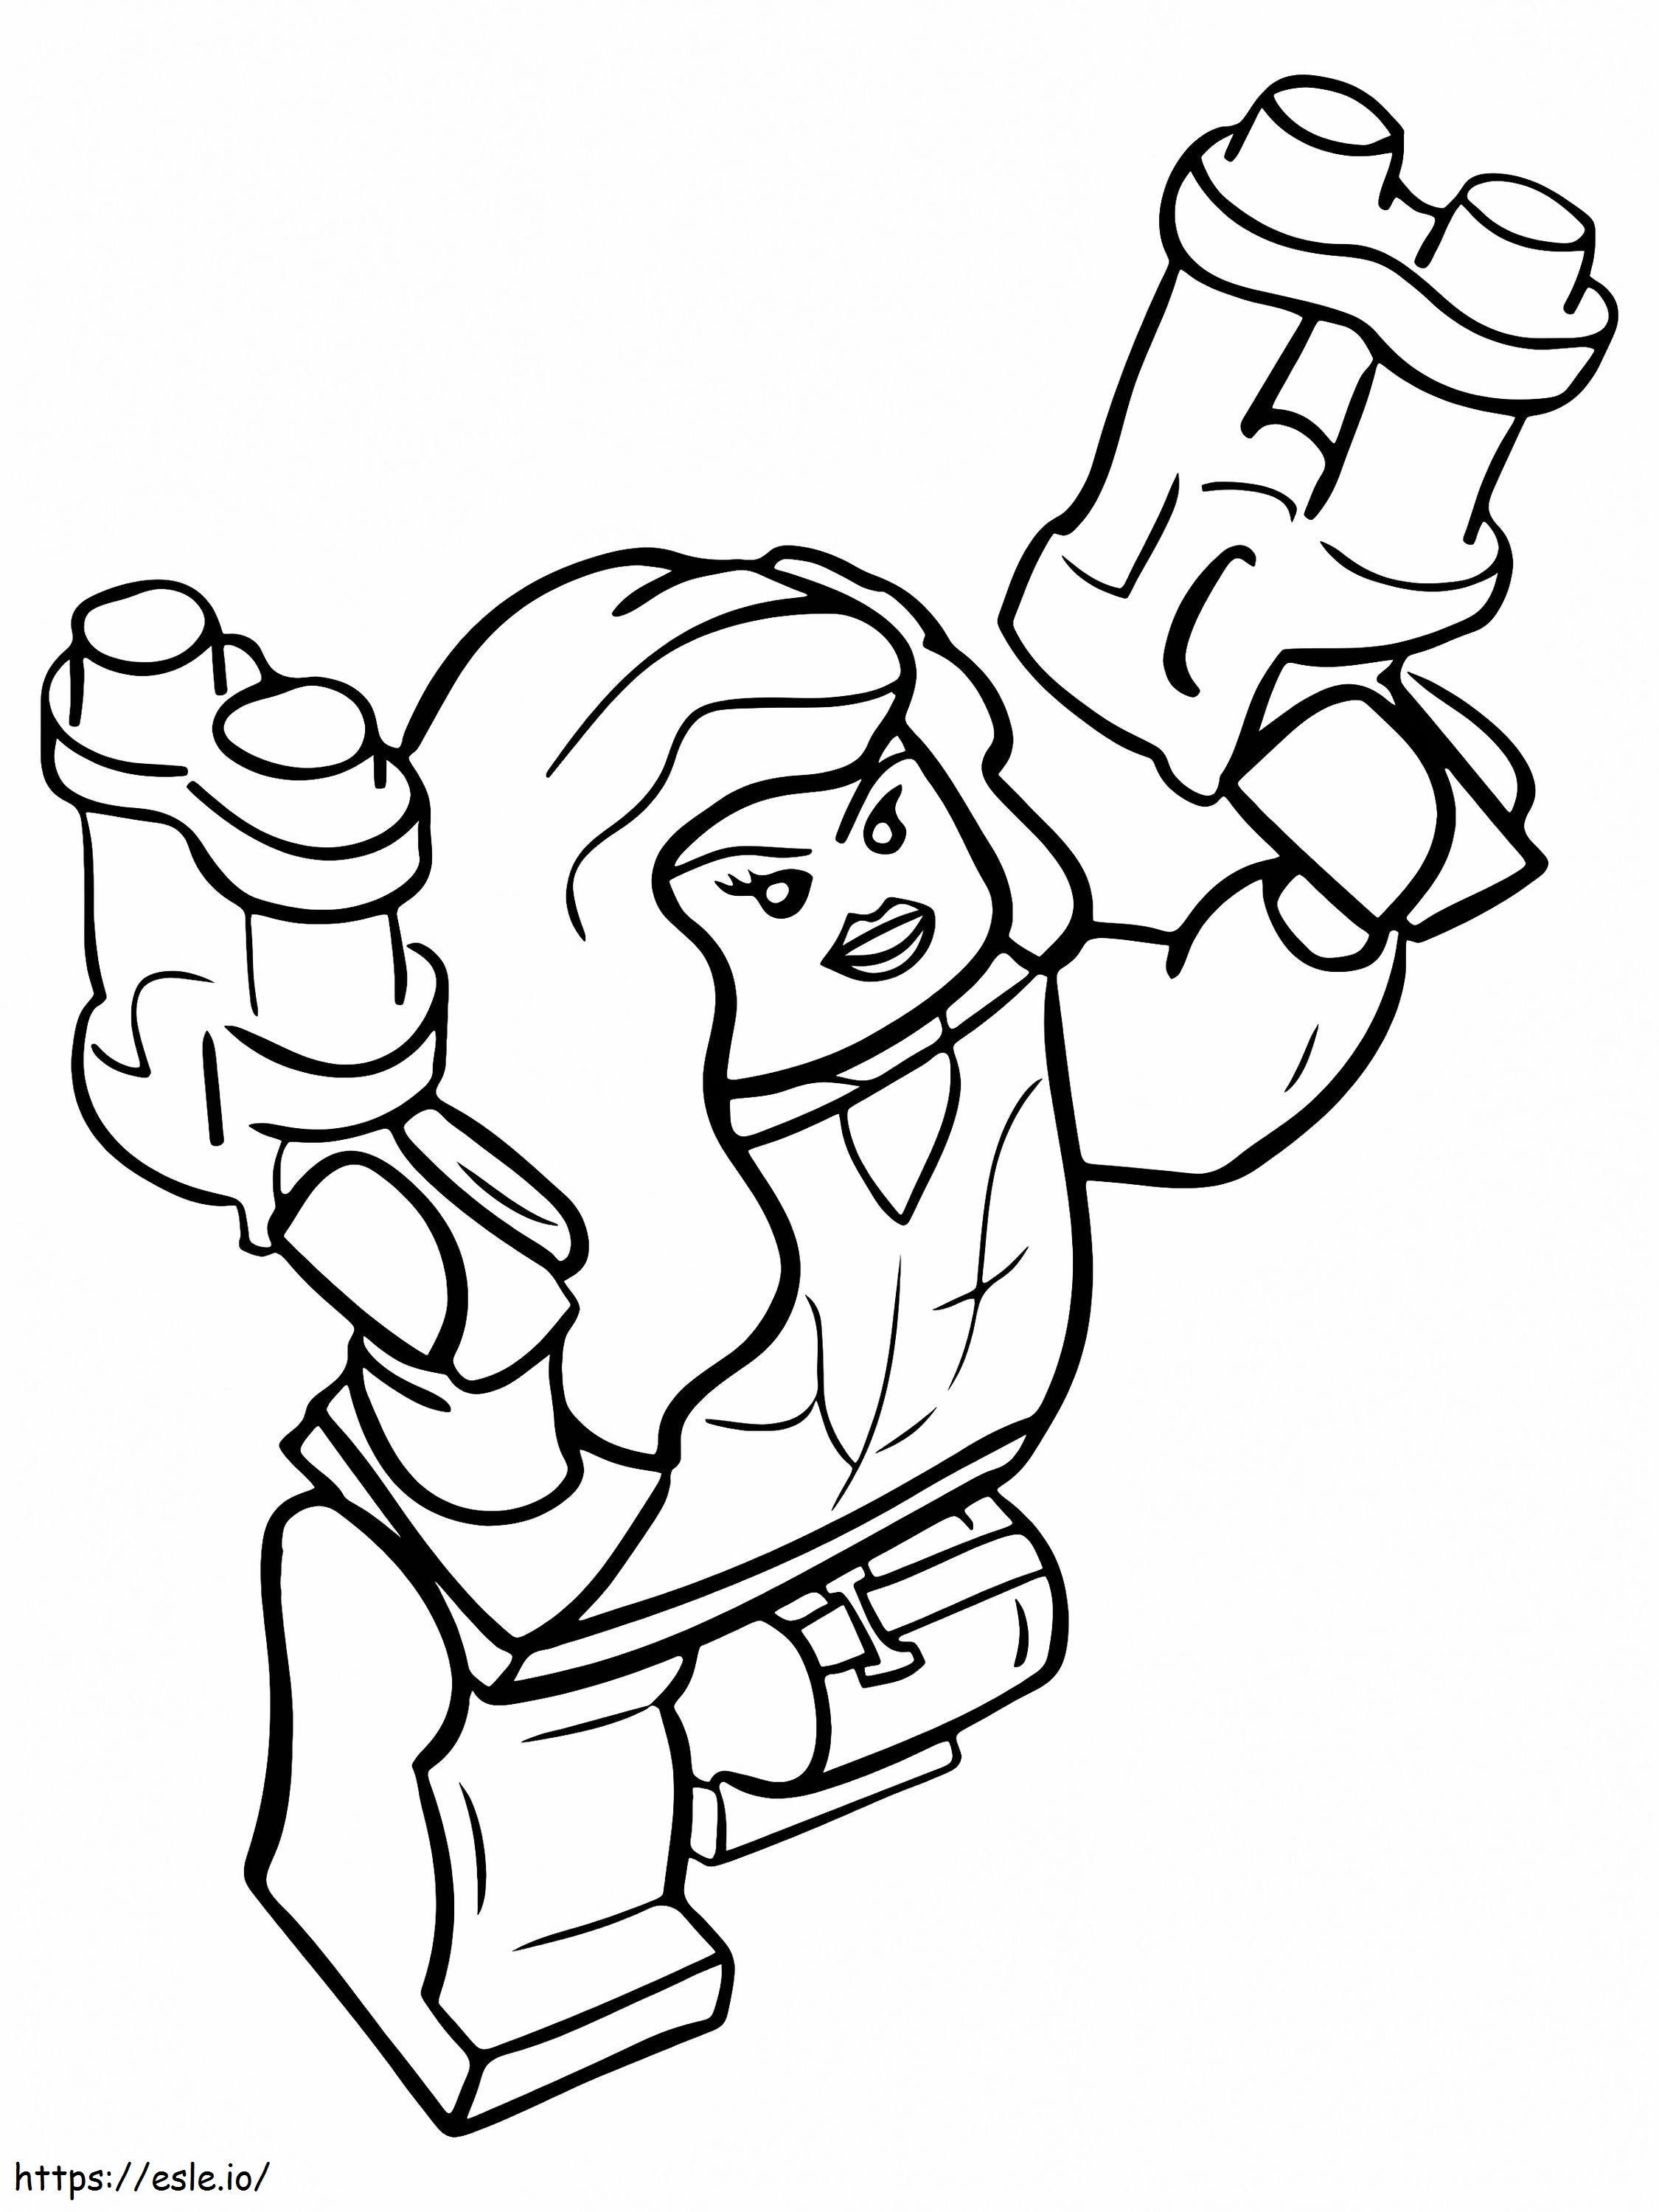 Black Widow Lego Avengers coloring page